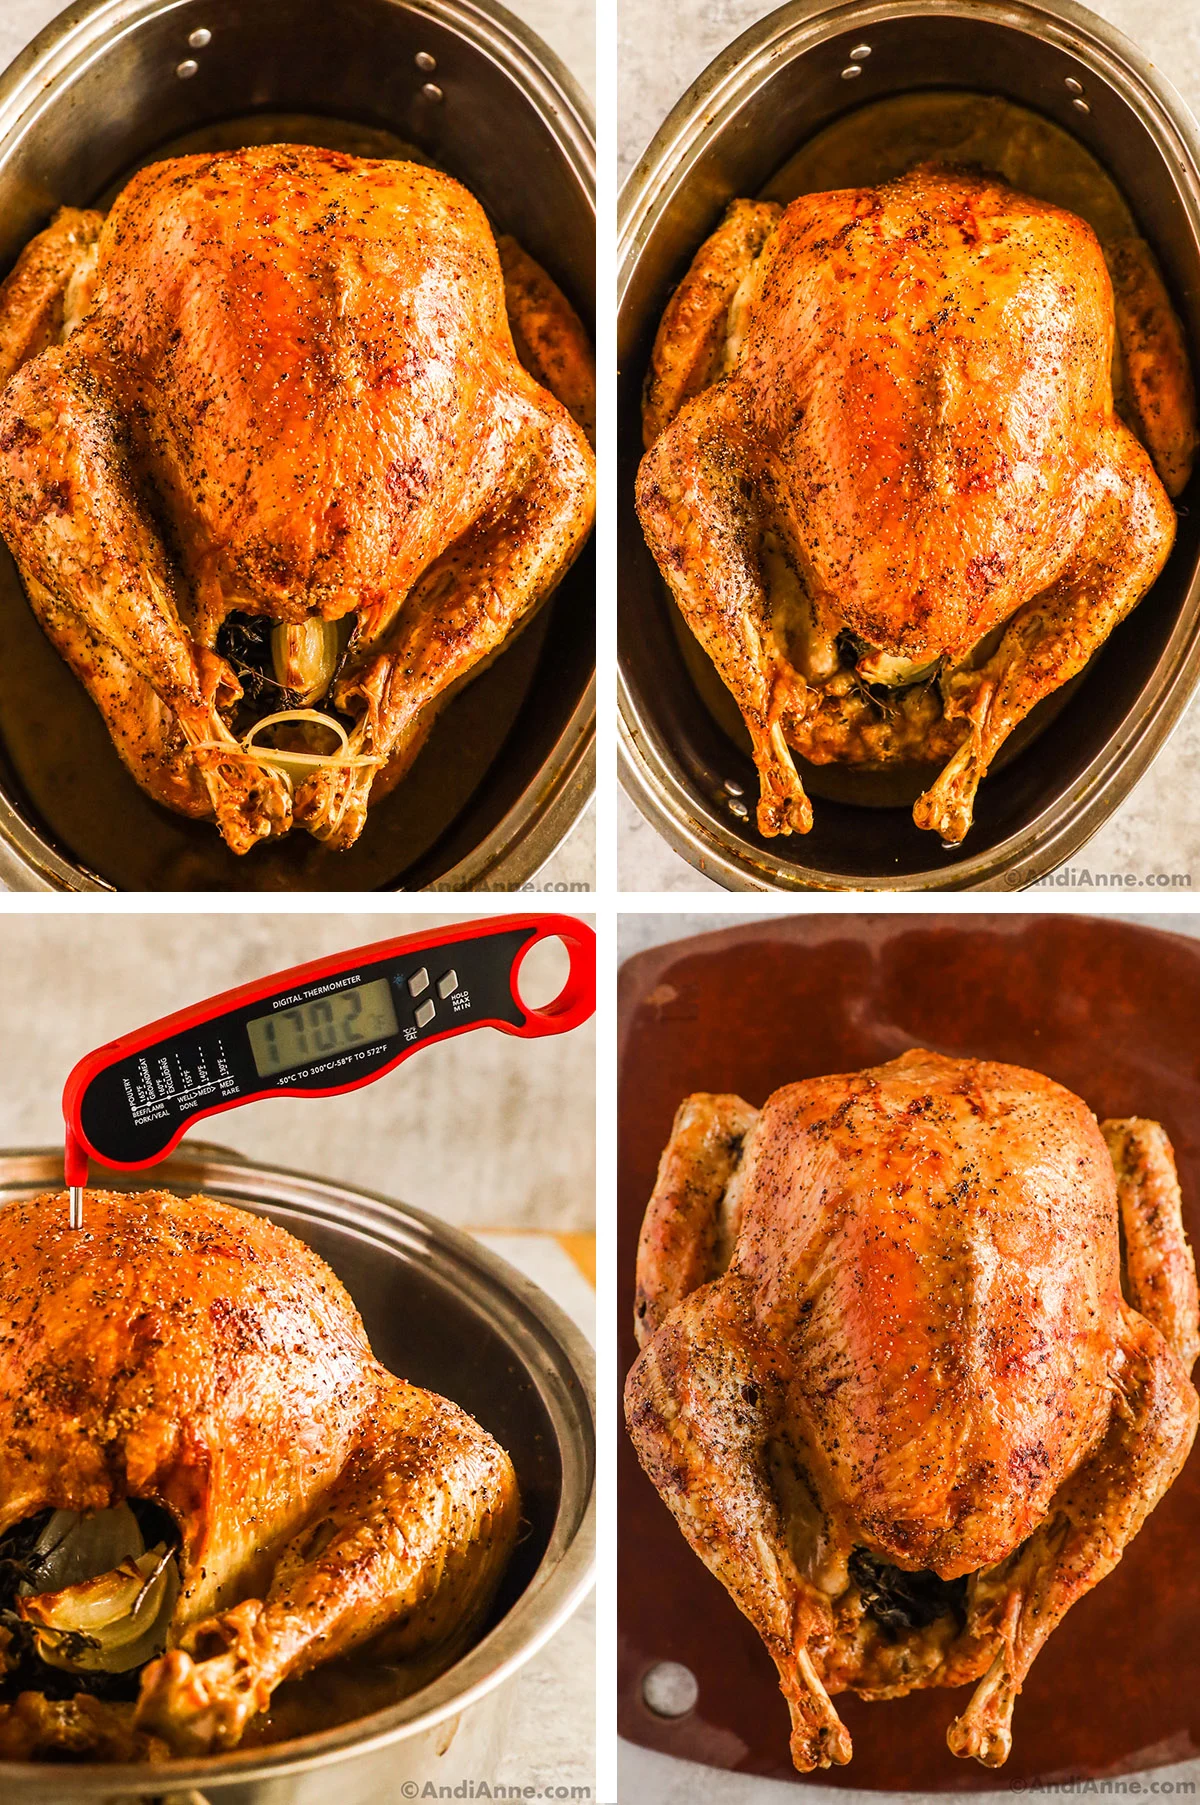 A roasted turkey in a turkey pan, a digital meat thermometer poking into the turkey meat, and the cooked turkey on a cutting board.